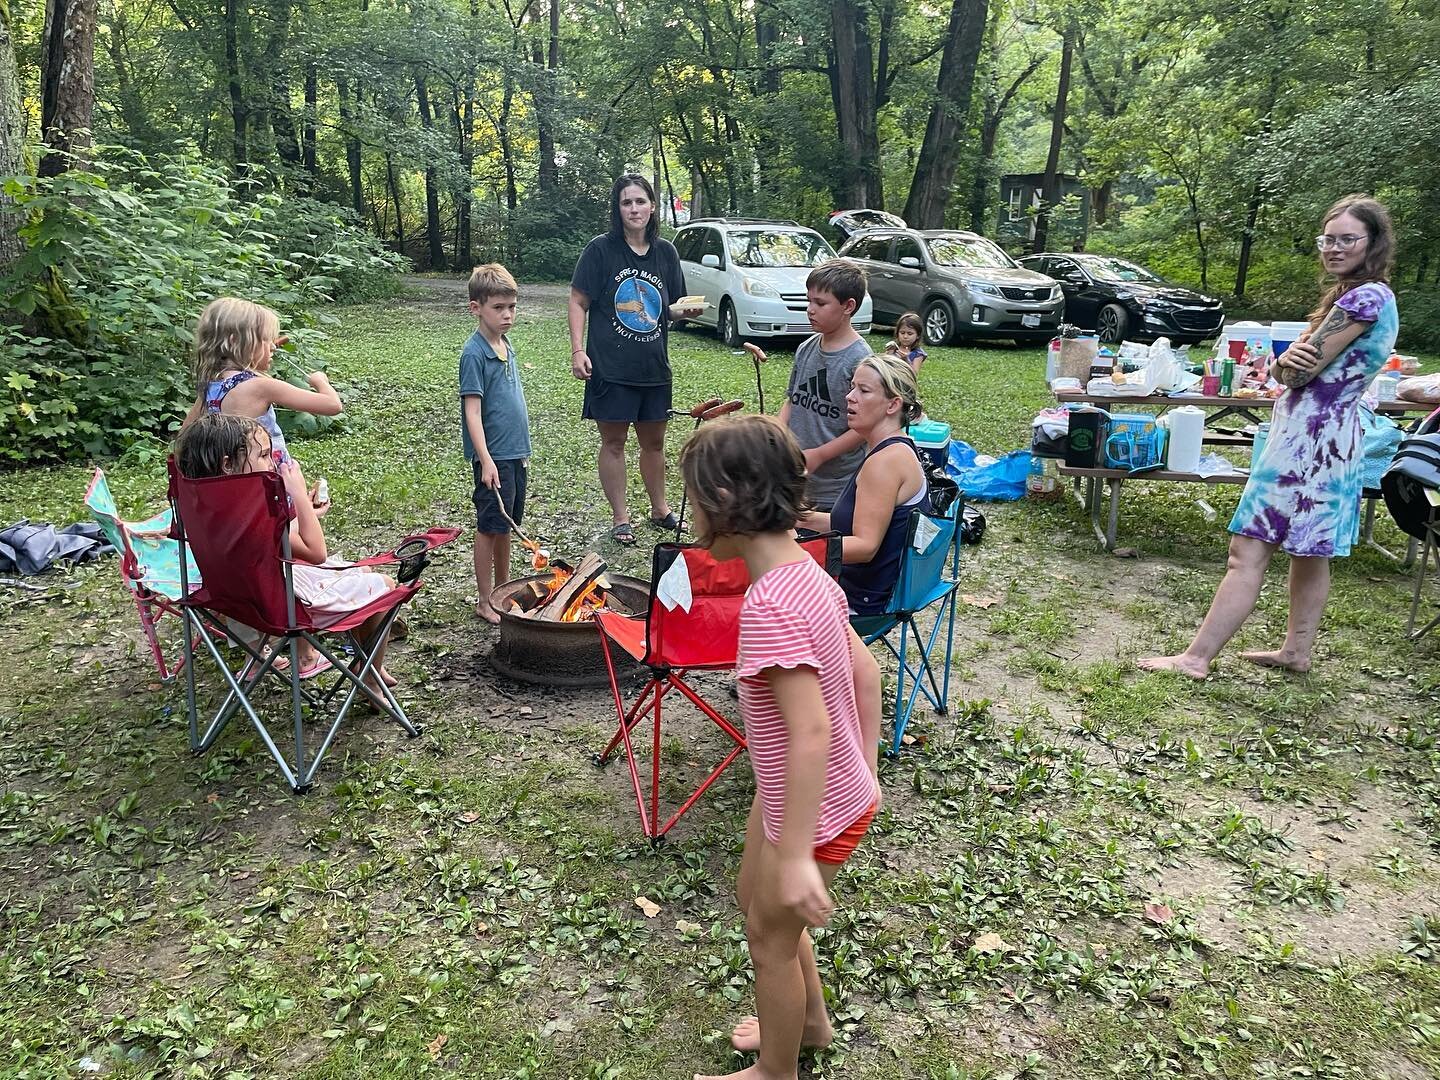 One amazing way Spark gives back to their Spark members is by hosting a camping trip each year at Morgan&rsquo;s camp ground! This year was an incredible weekend of community, s&rsquo;mores, and river play❤️